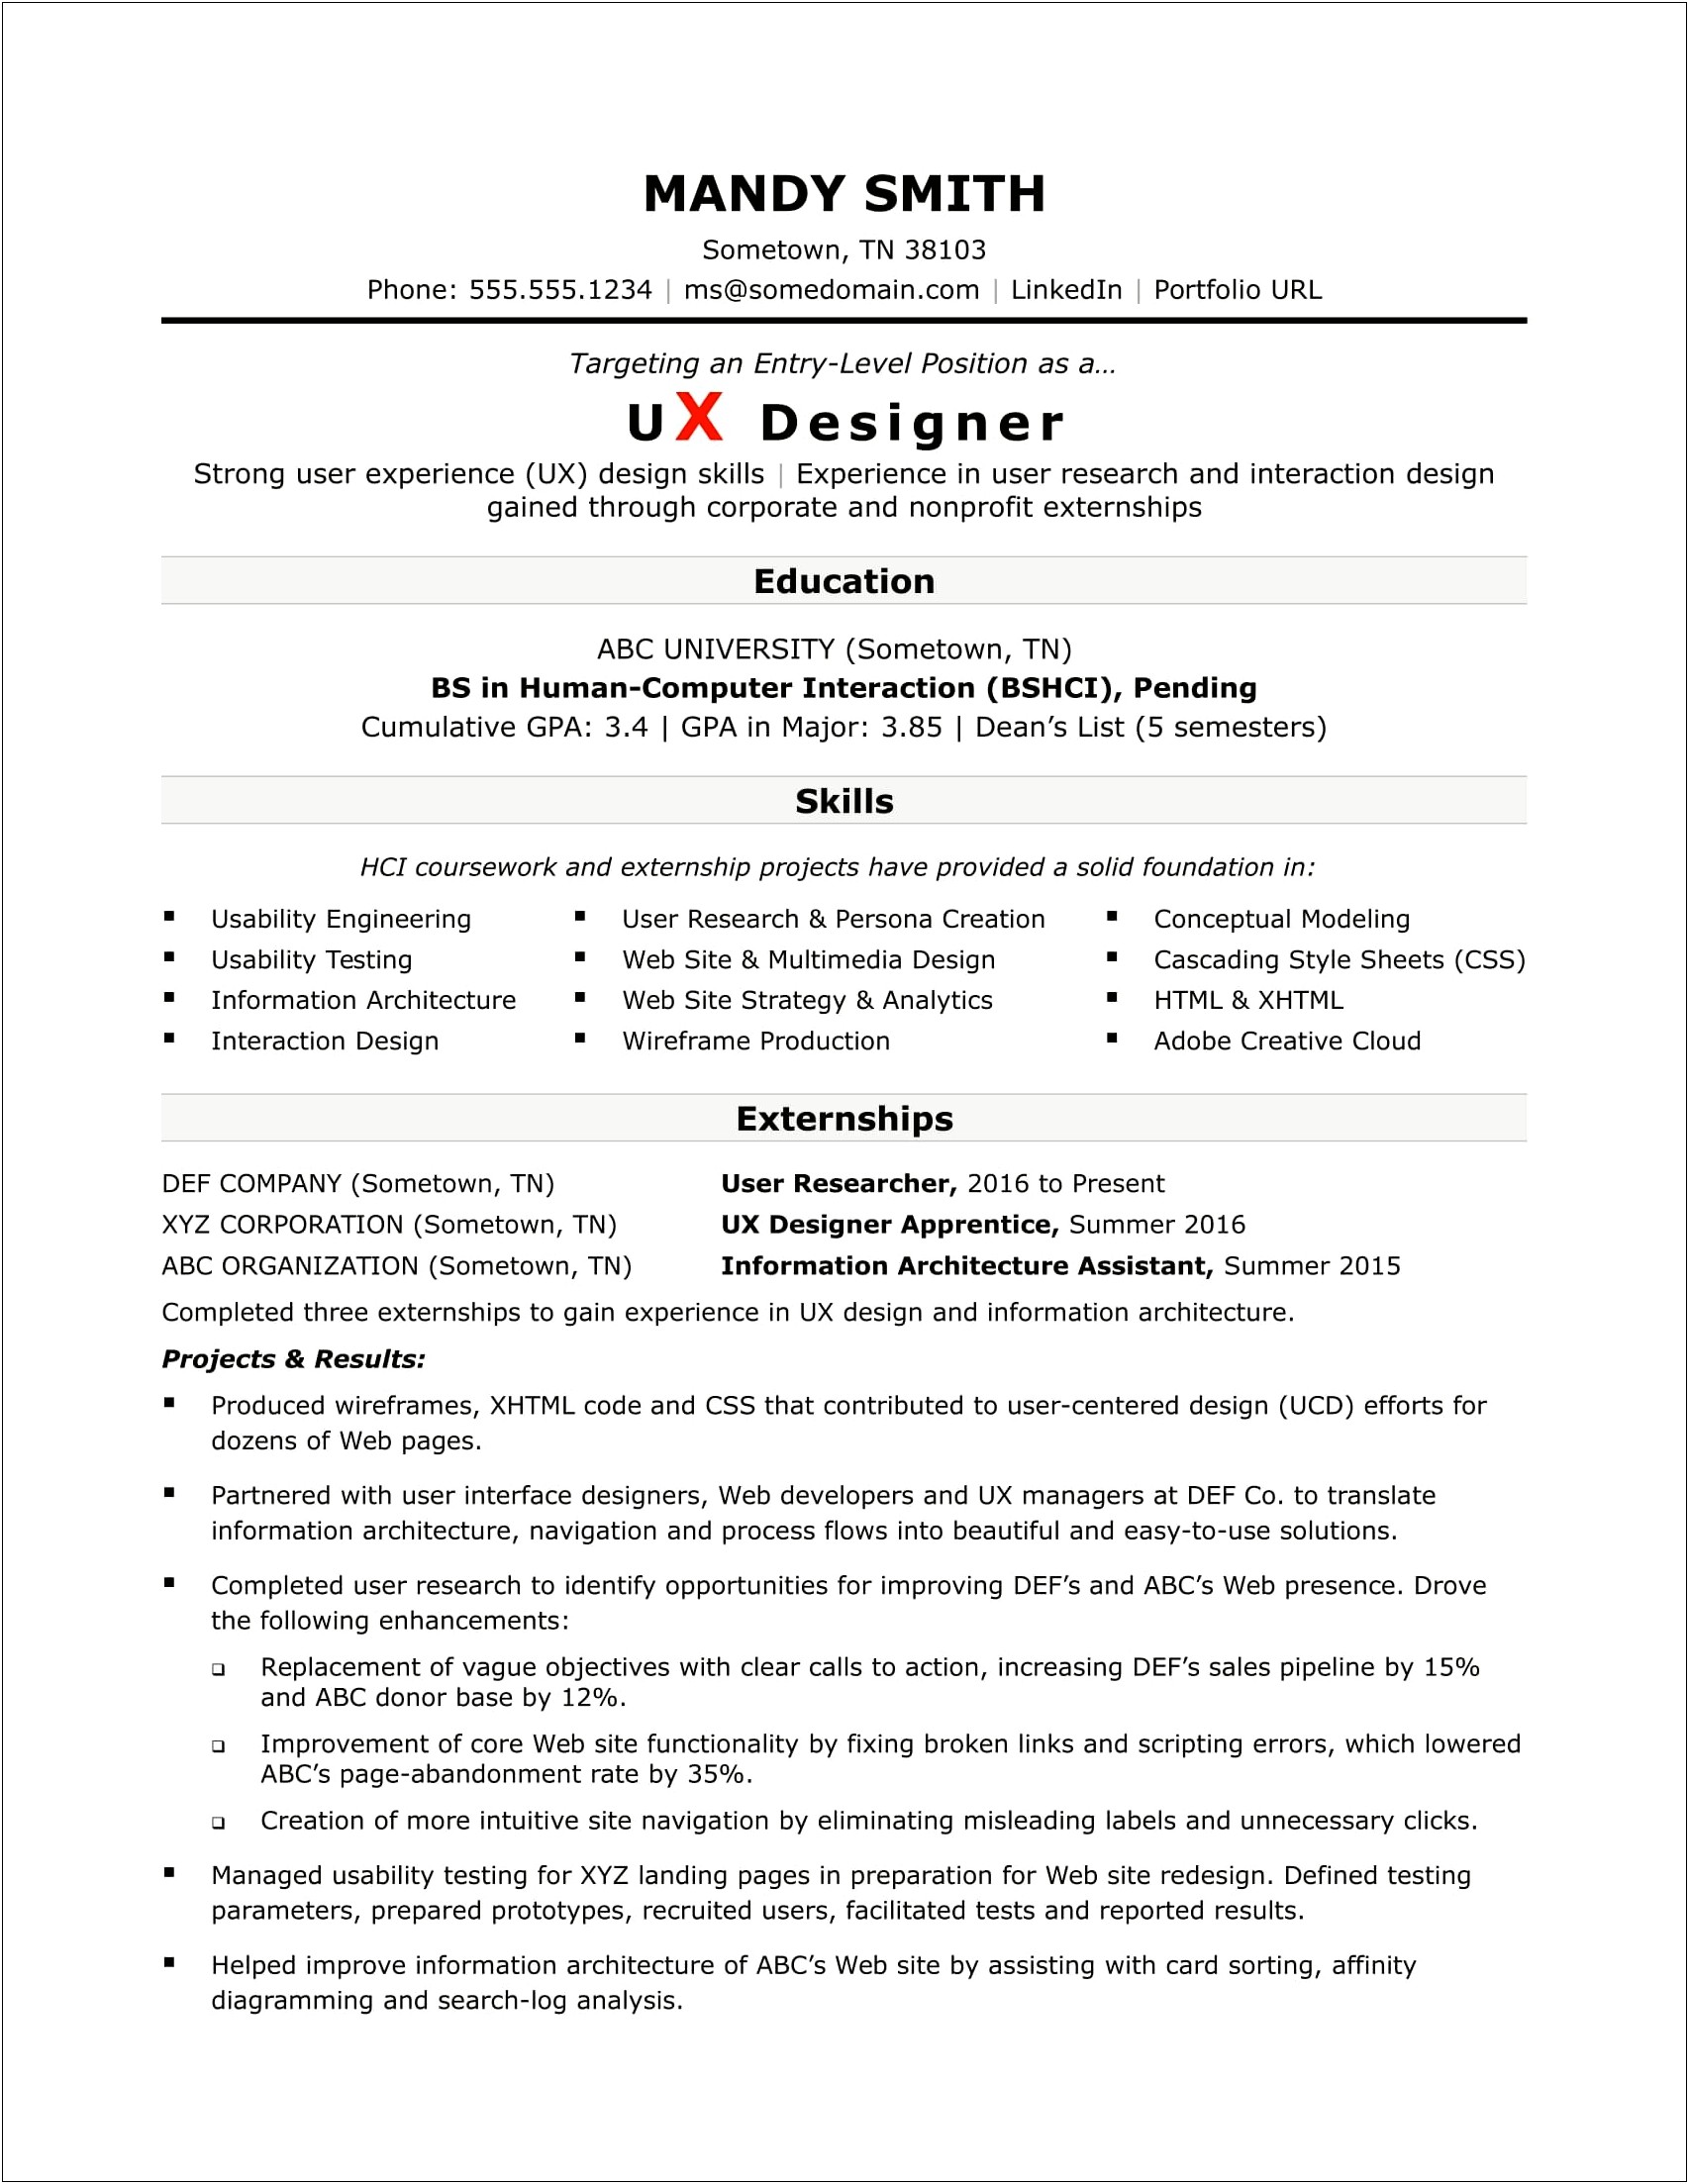 Listing Education Experience And Skills On Your Resume